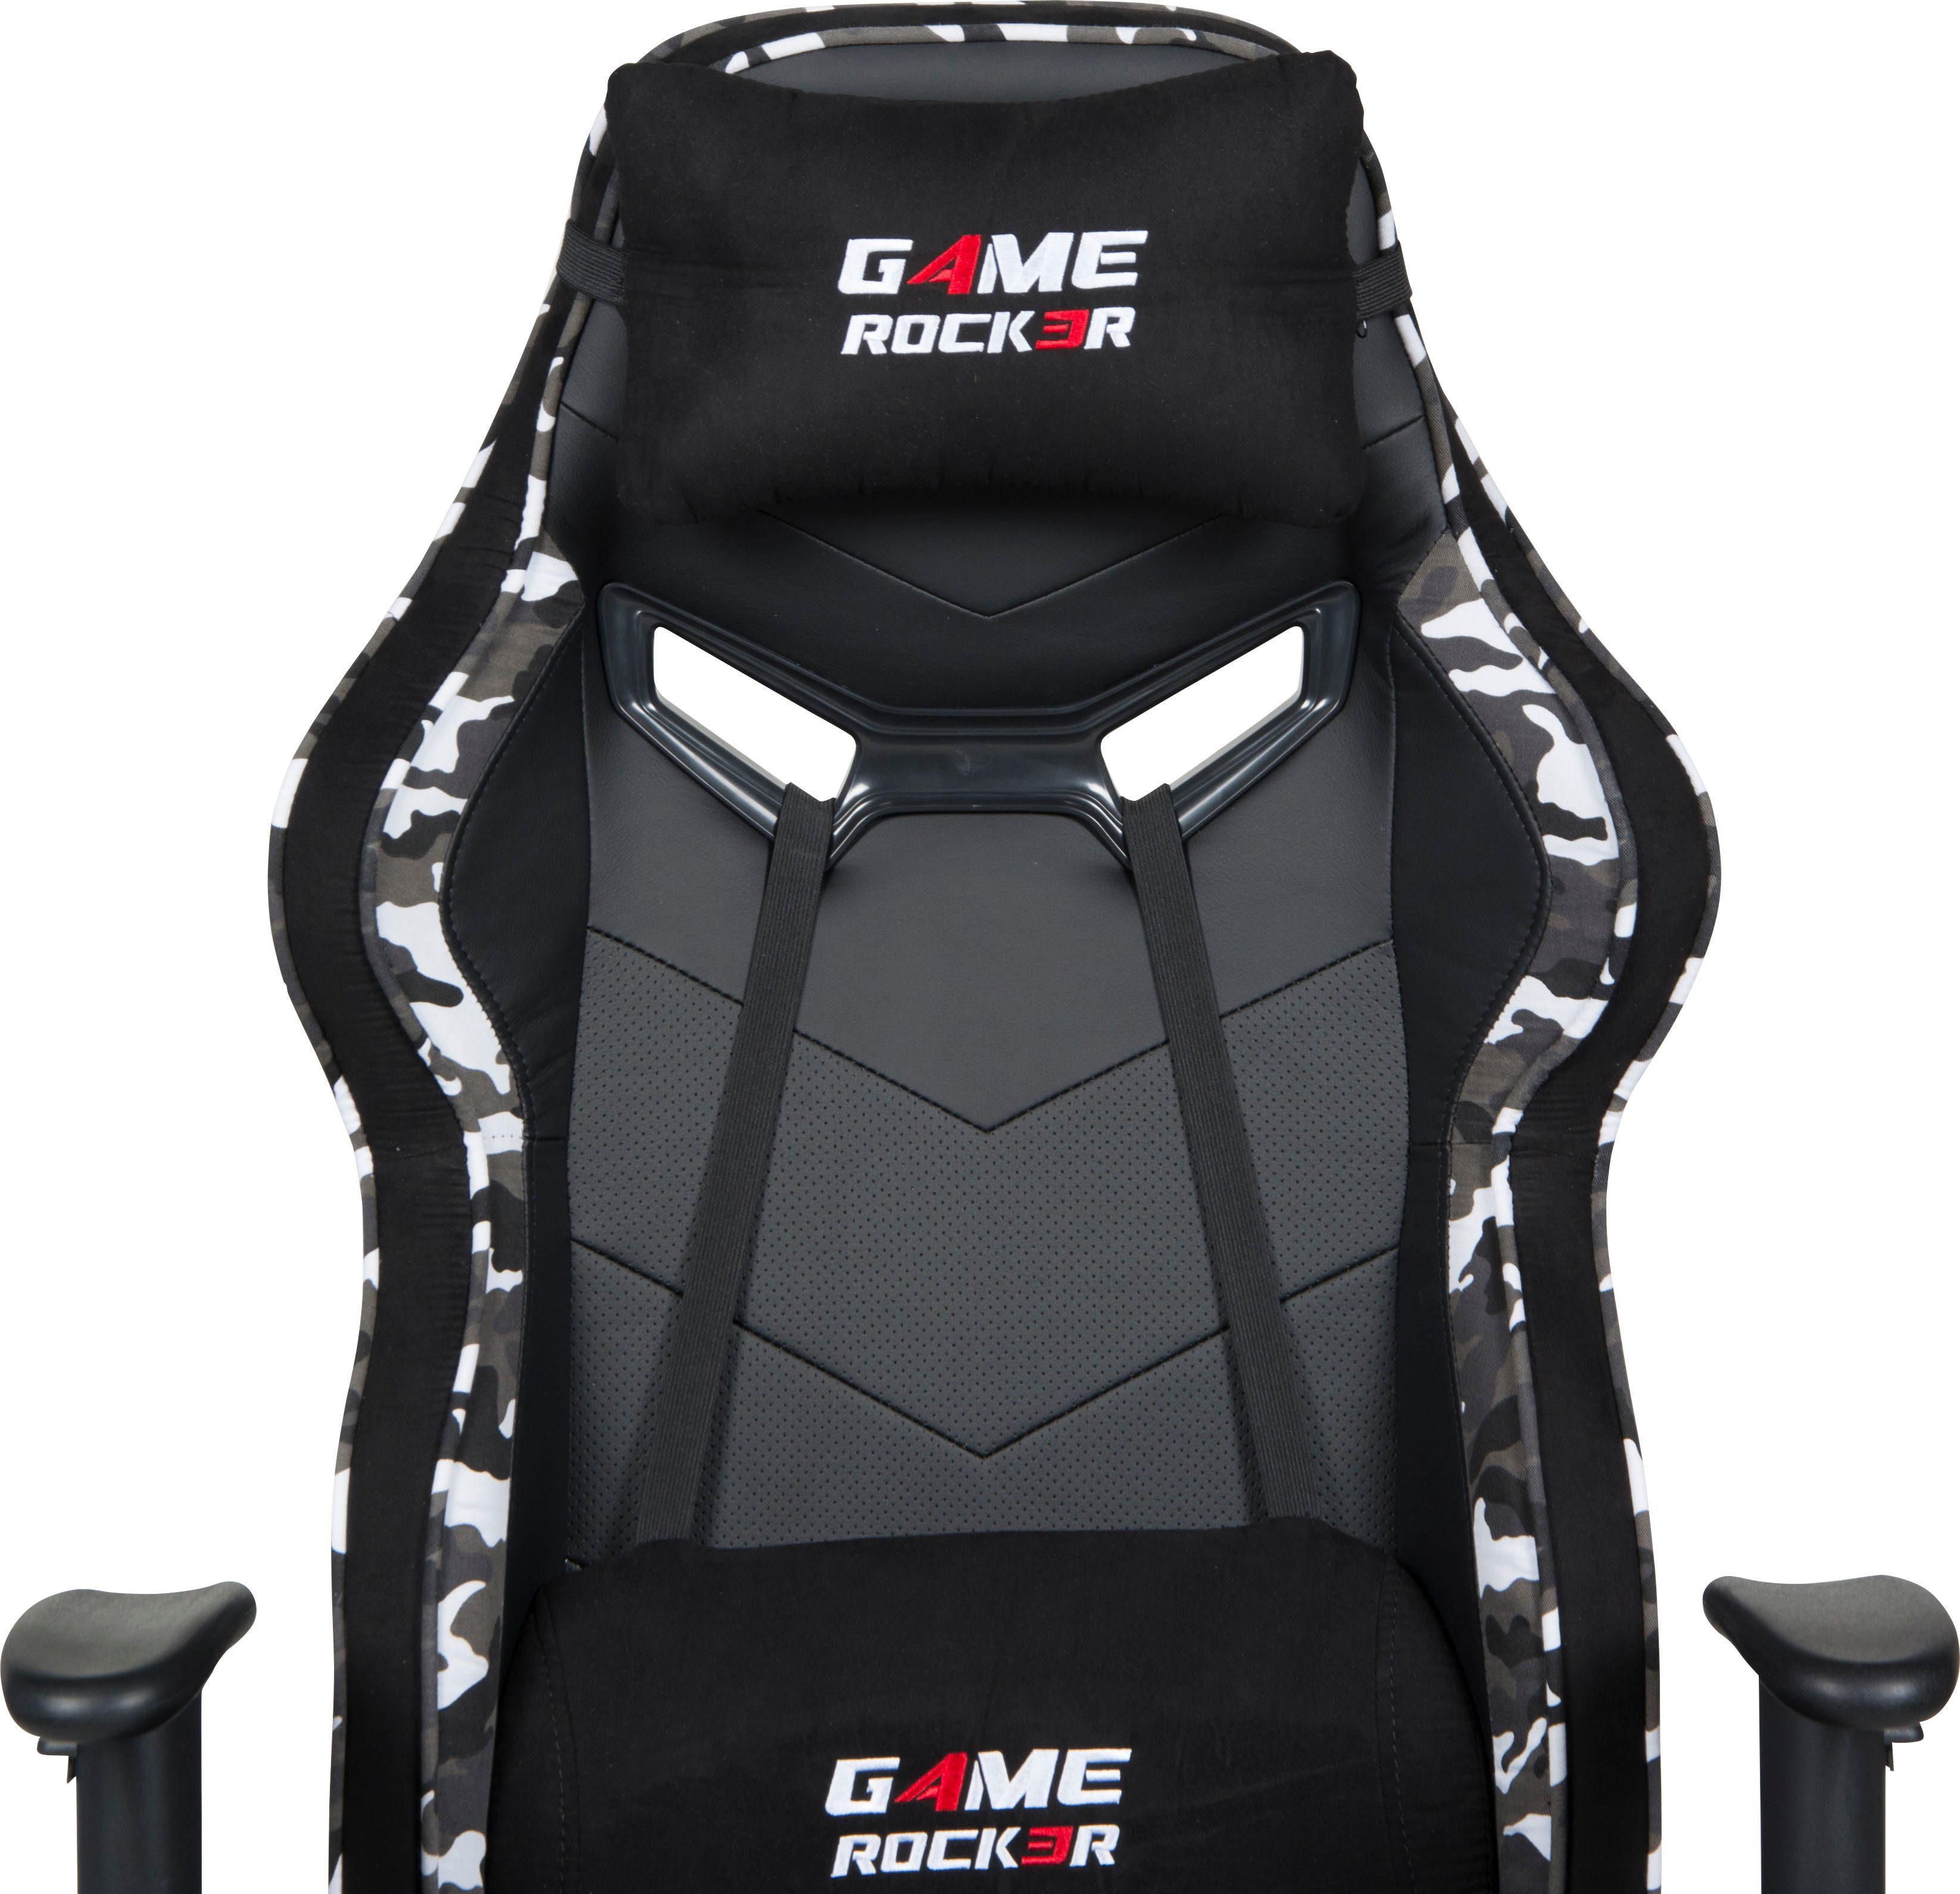 Duo Collection Chefsessel Game-Rocker grau Optik in Chair Gaming schwarz/camouflage Camouflage G-30